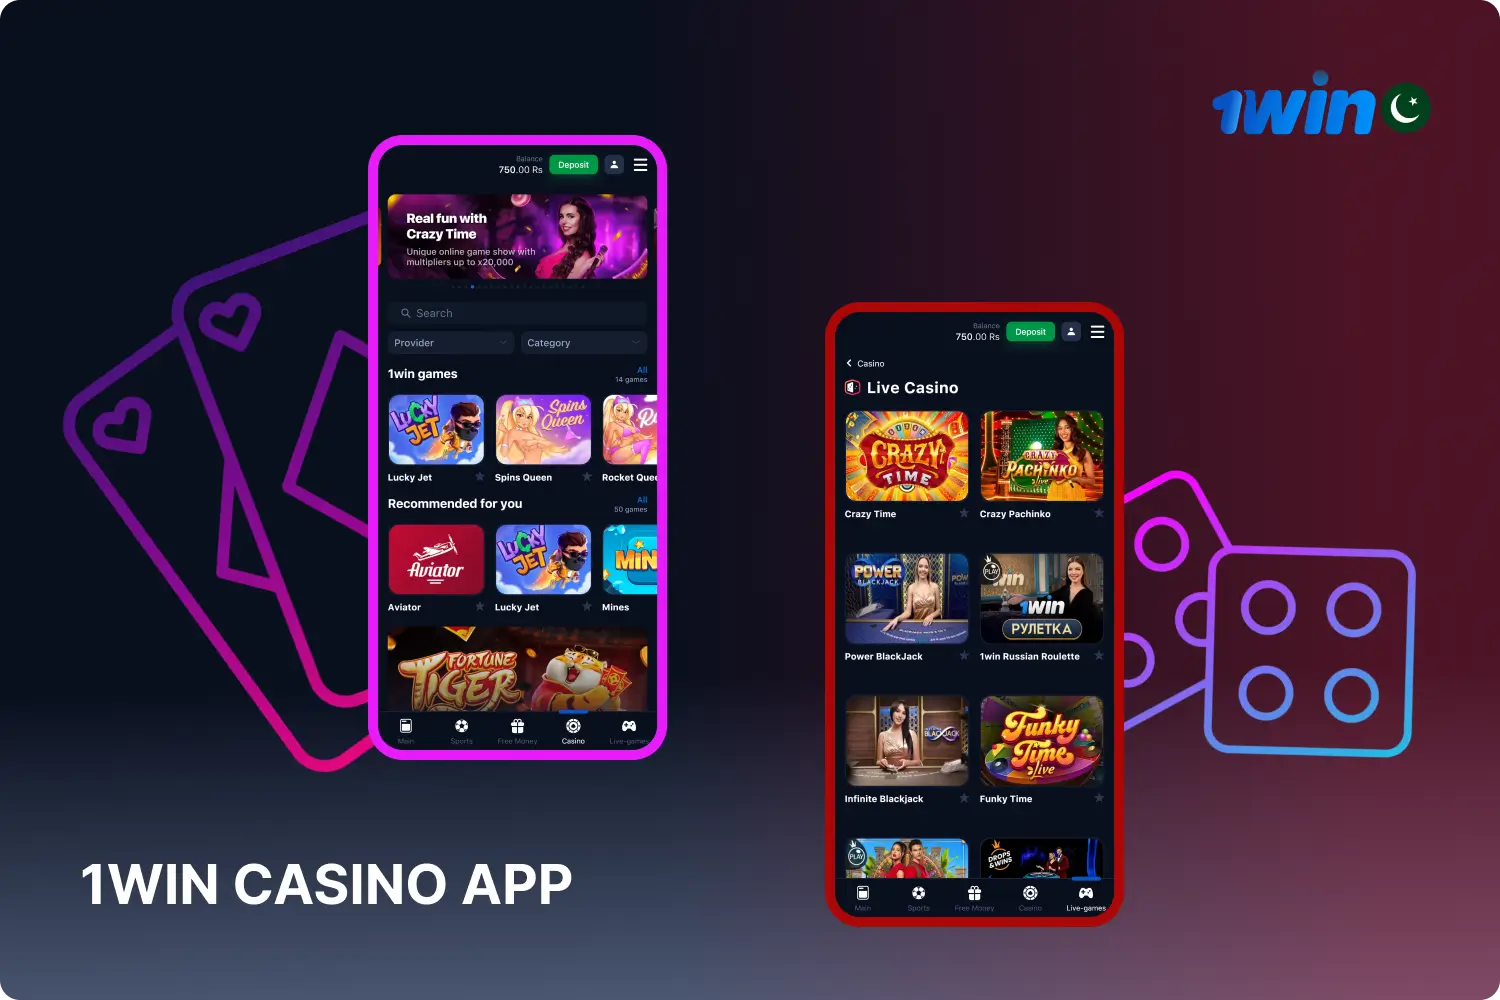 A wide range of casino games such as roulette, poker, blackjack and many others are available to Pakistani users of the 1win mobile application